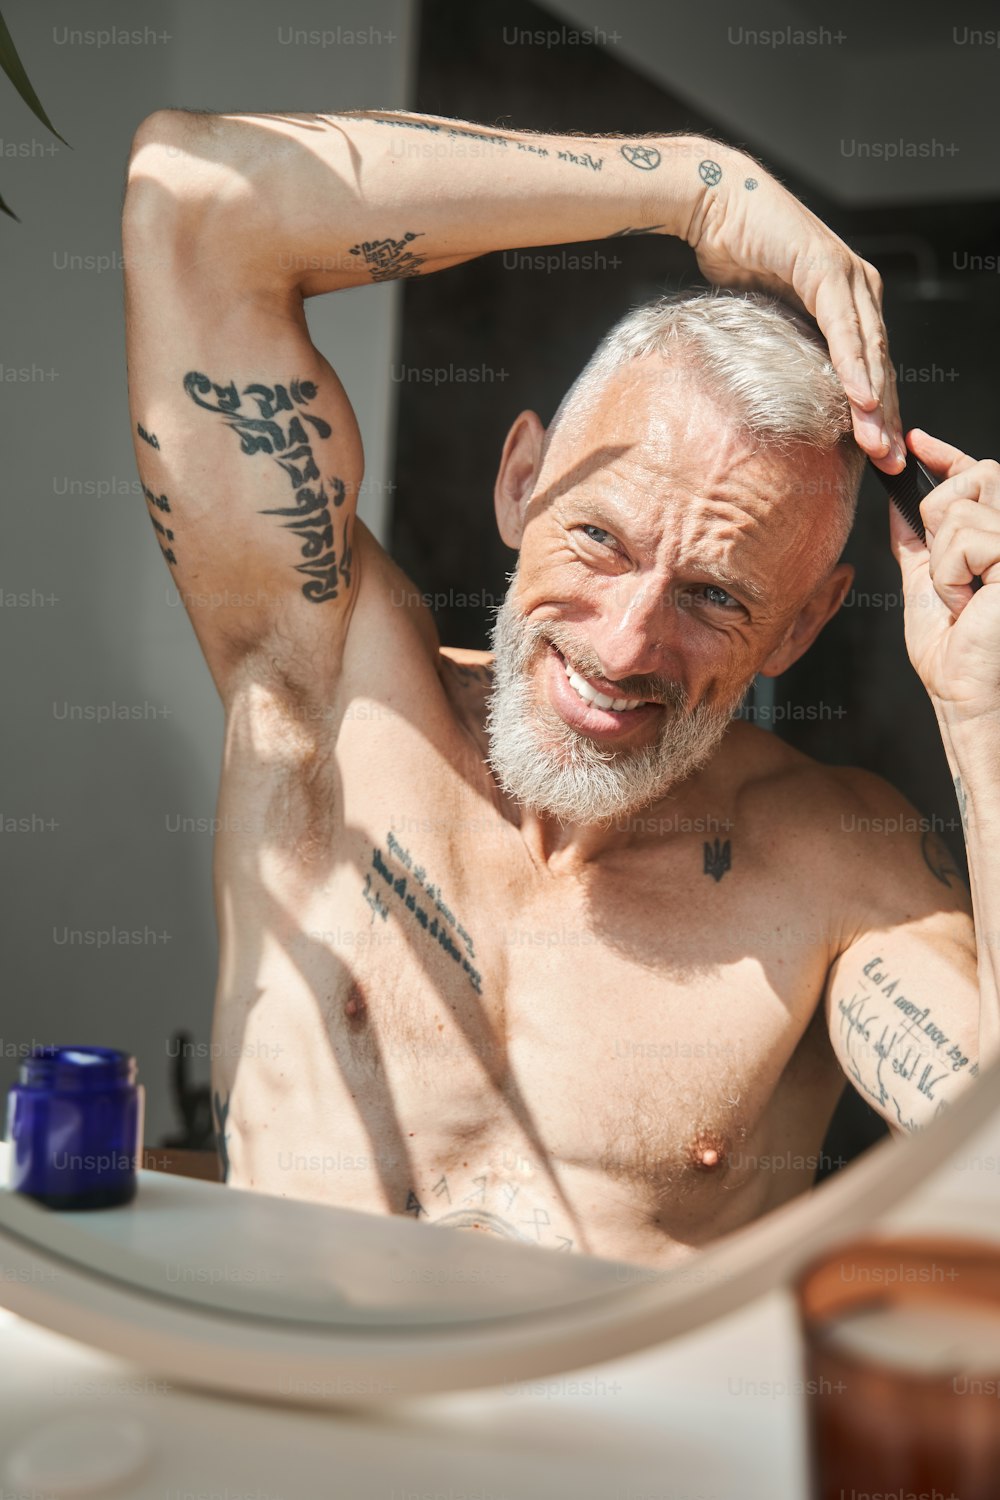 Mature man combing hair on his head while looking at mirror in bathroom. Concept of skin care and hygiene. Domestic lifestyle. Smiling grey haired european male pensioner with tattoos